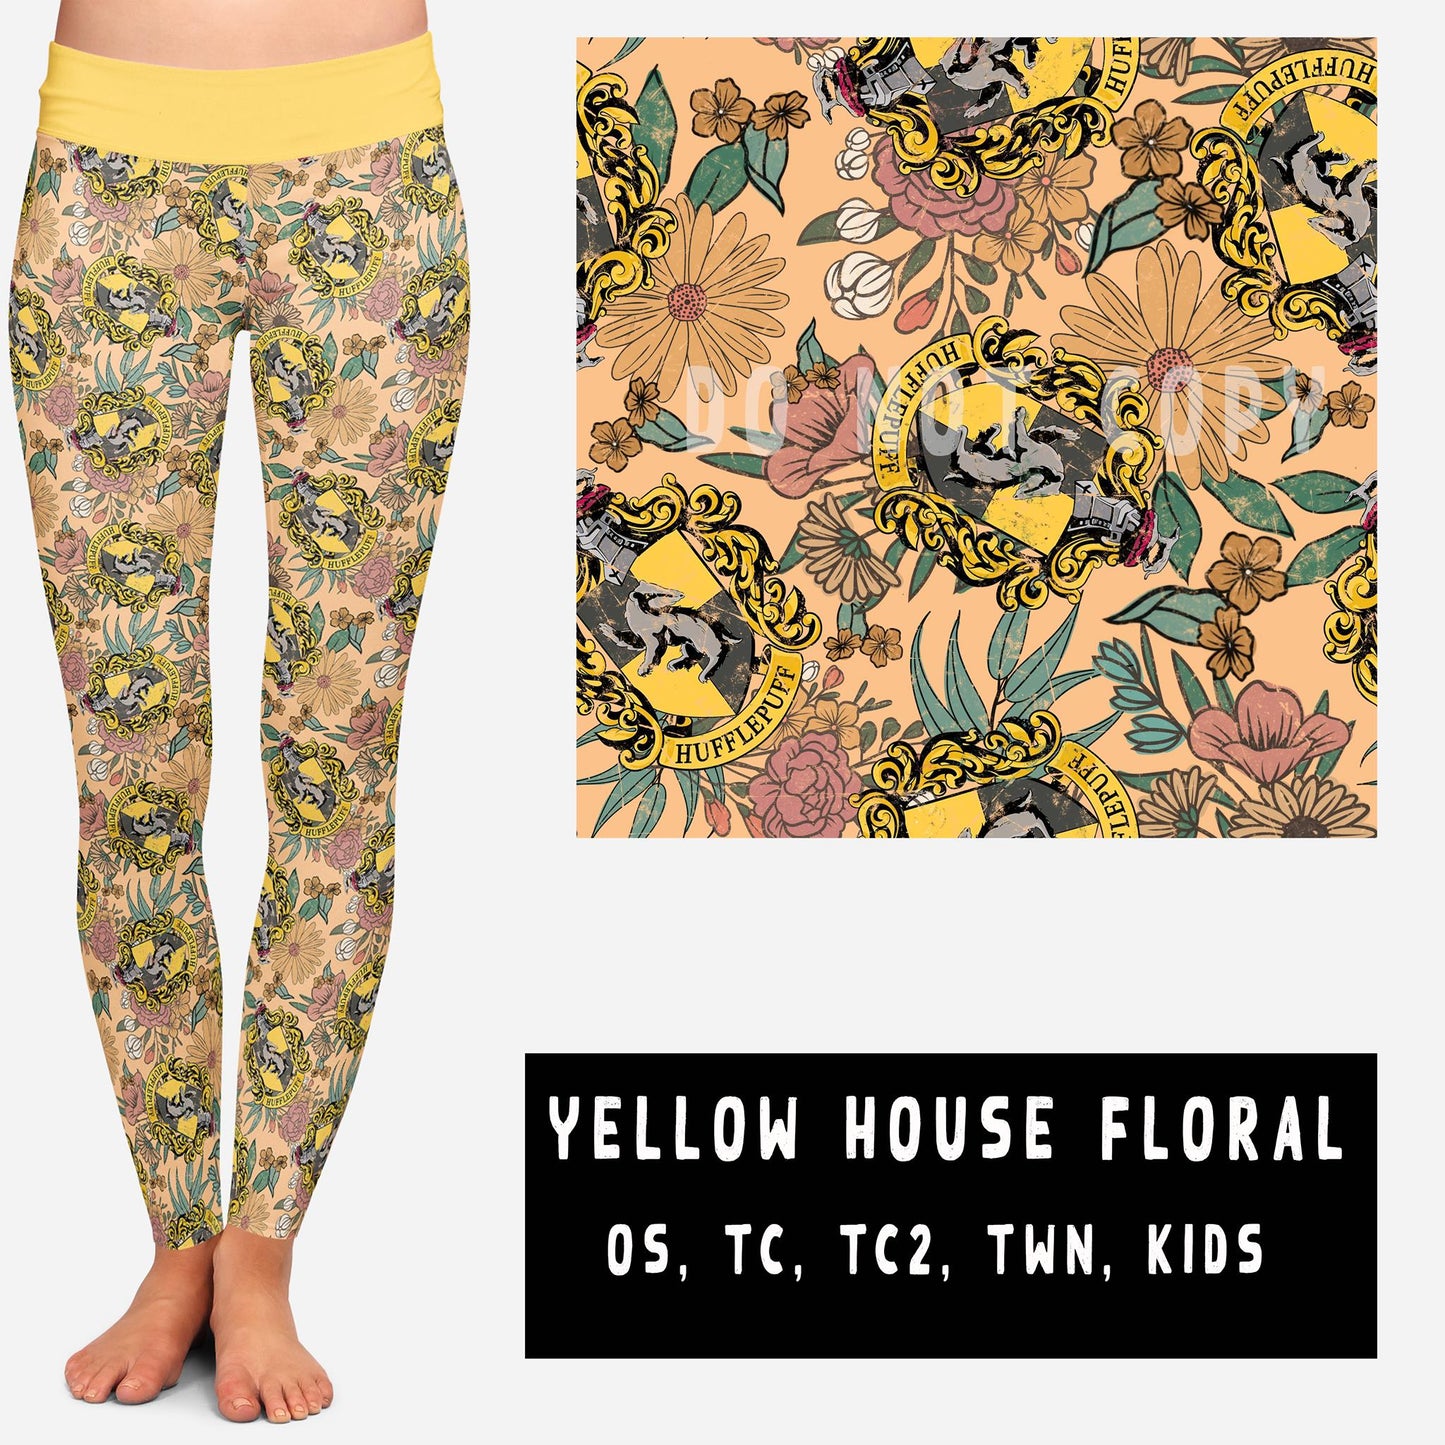 OUTFIT RUN 3-YELLOW HOUSE FLORAL